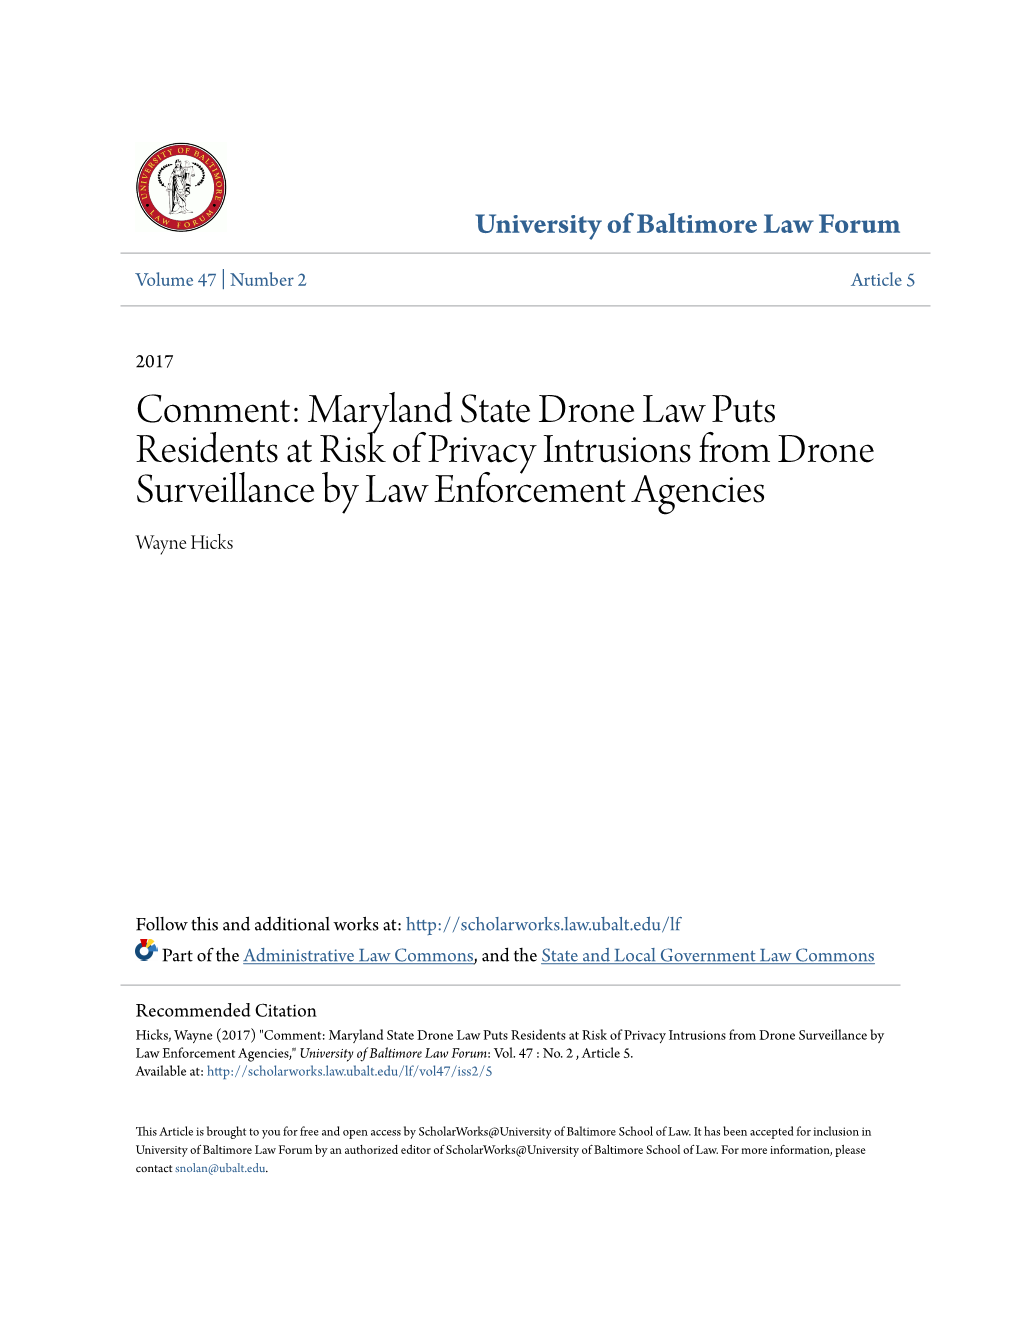 Comment: Maryland State Drone Law Puts Residents at Risk of Privacy Intrusions from Drone Surveillance by Law Enforcement Agencies Wayne Hicks